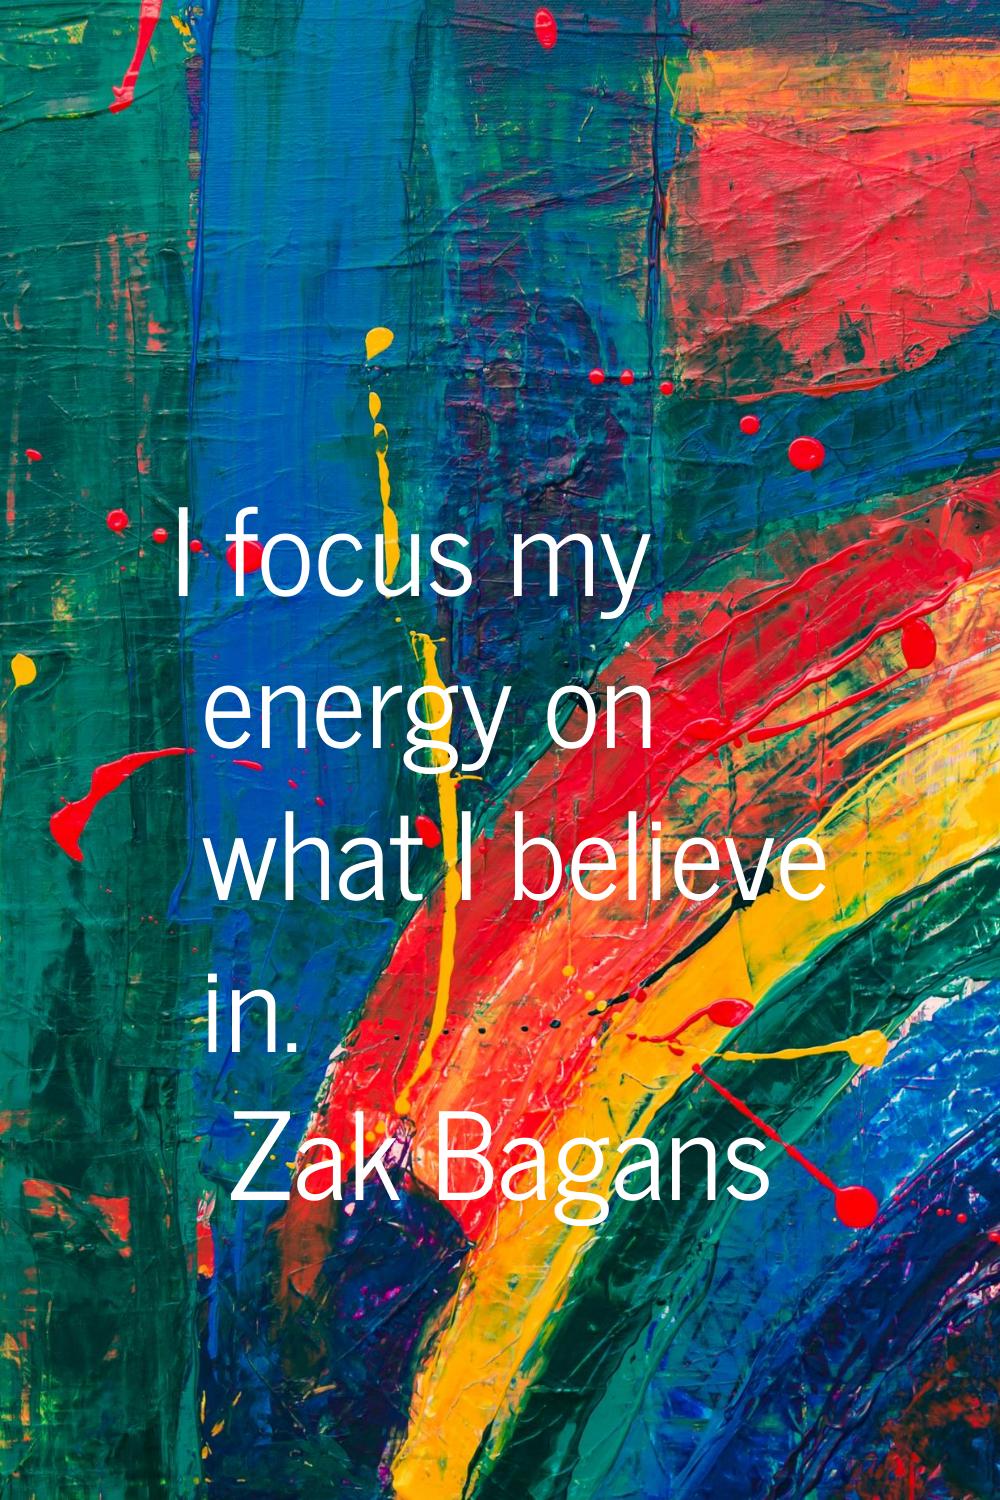 I focus my energy on what I believe in.